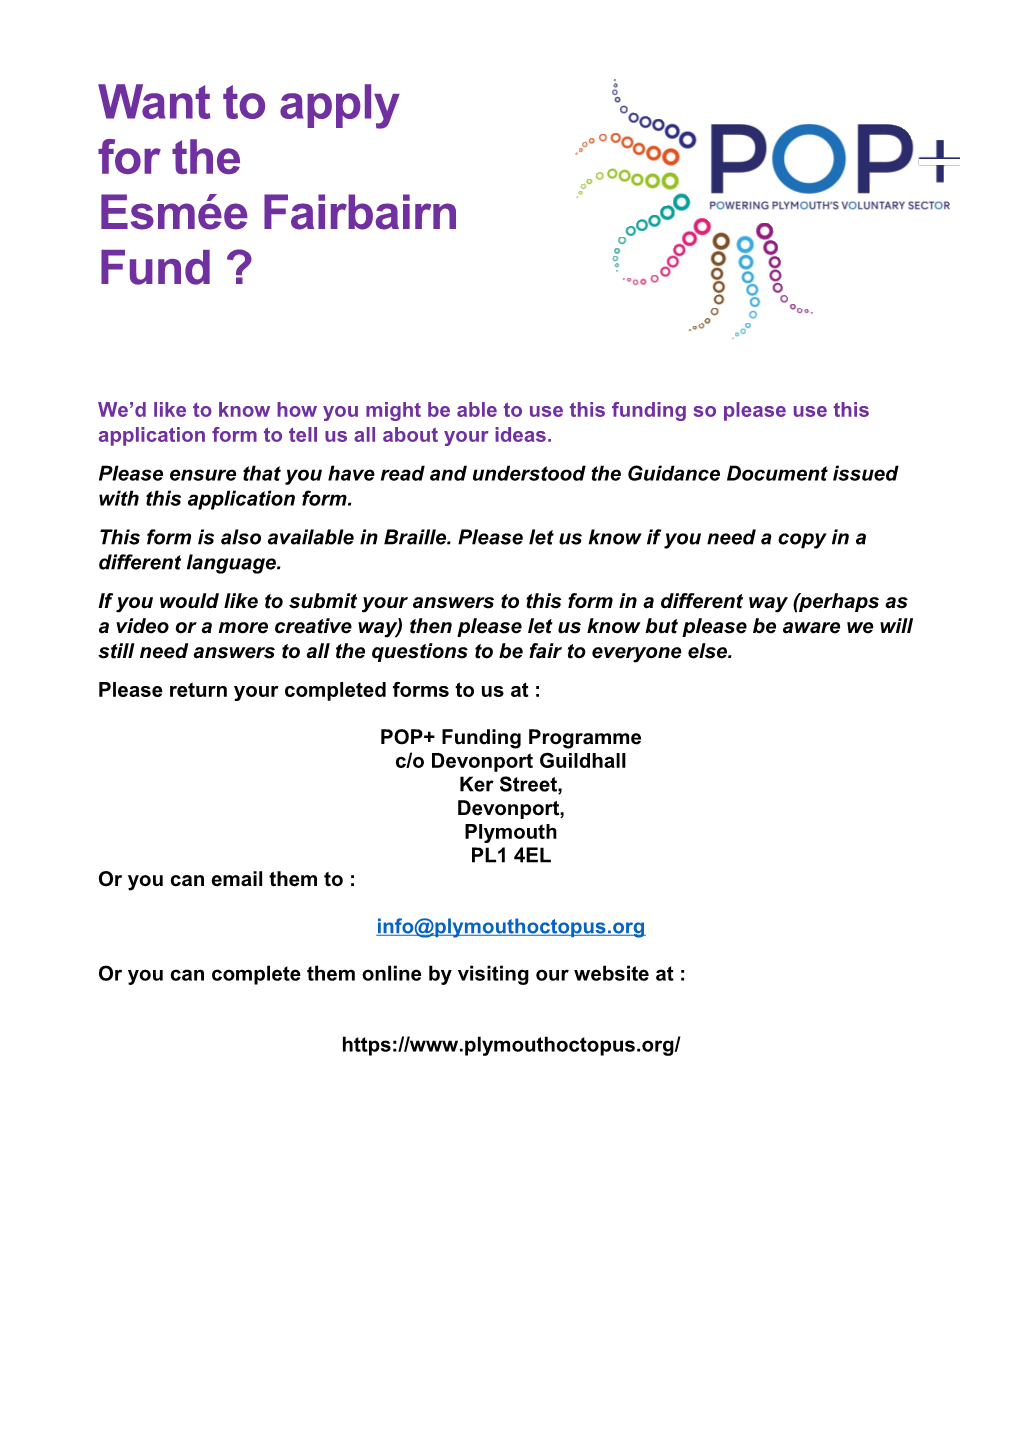 We D Like to Know How You Might Be Able to Use This Funding So Please Use This Application